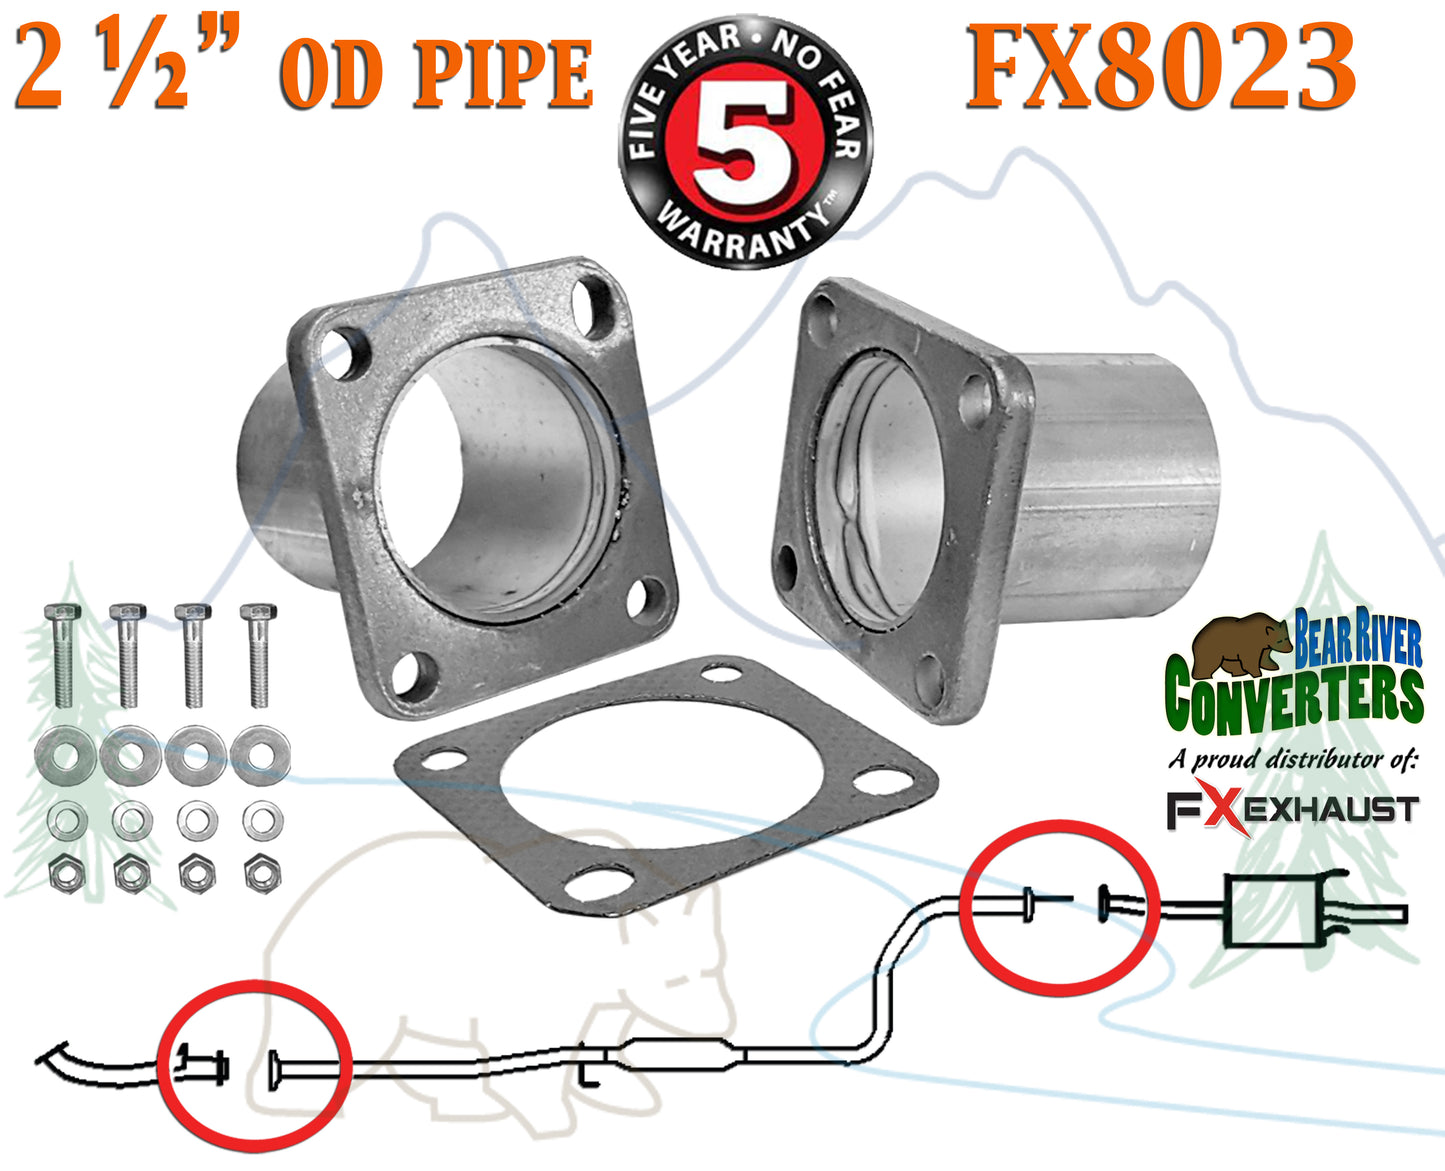 FX8023 2 1/2" OD Universal QuickFix Exhaust Square Flange Repair Pipe Kit